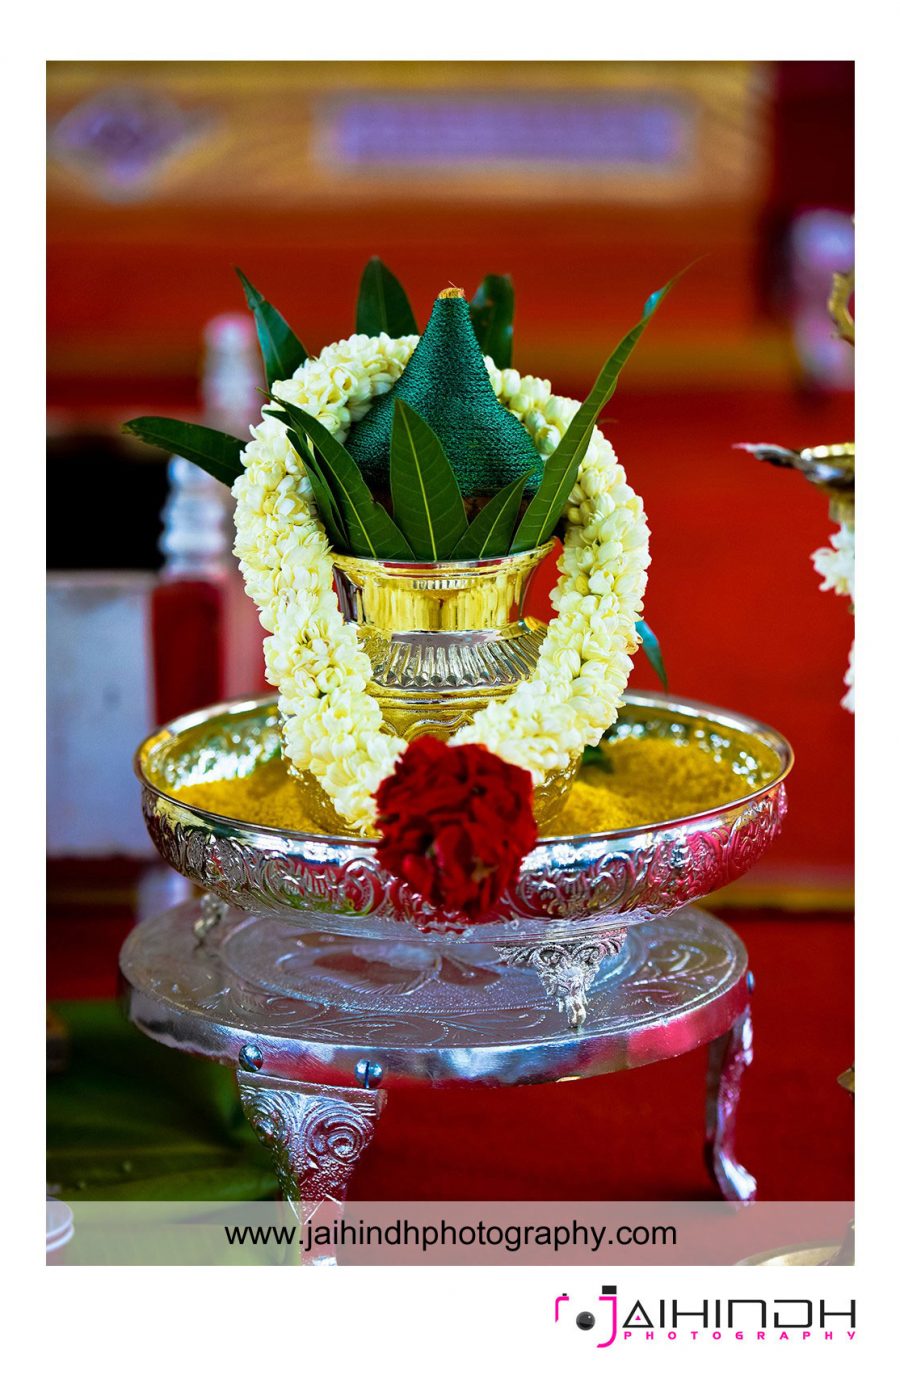 Candid photography in Theni, Wedding Photography in Theni, Best Photographers in Theni, Candid wedding photographers in Theni, Marriage photography in Theni, Candid Photography in Theni, Best Candid Photographers in Theni. Videographers in Theni, Wedding Videographers in Theni.